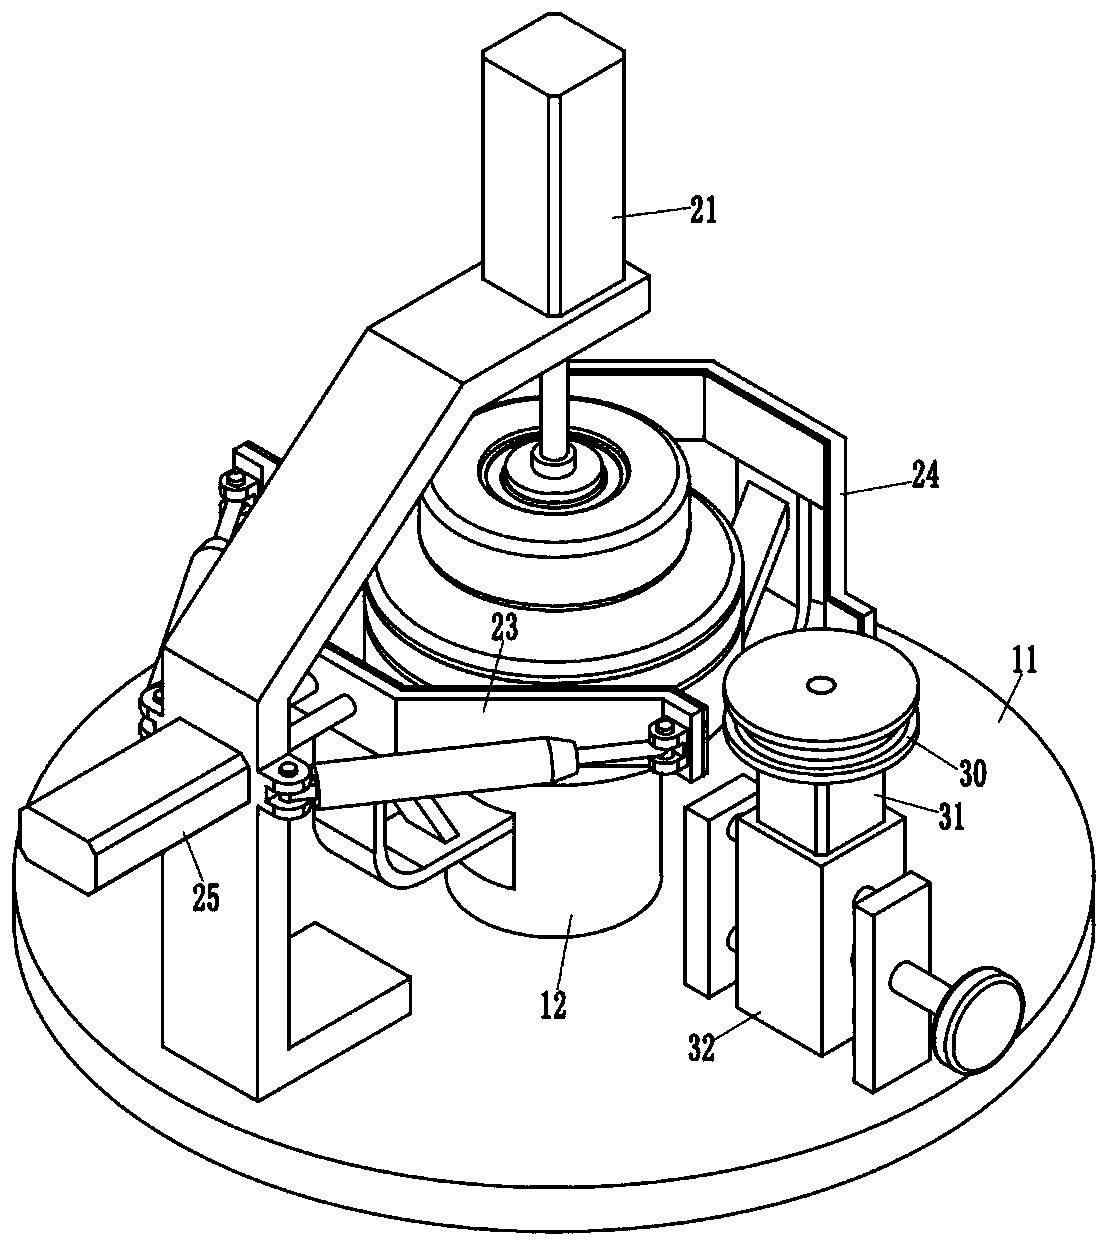 Edge grinding device for outer wall of round glass